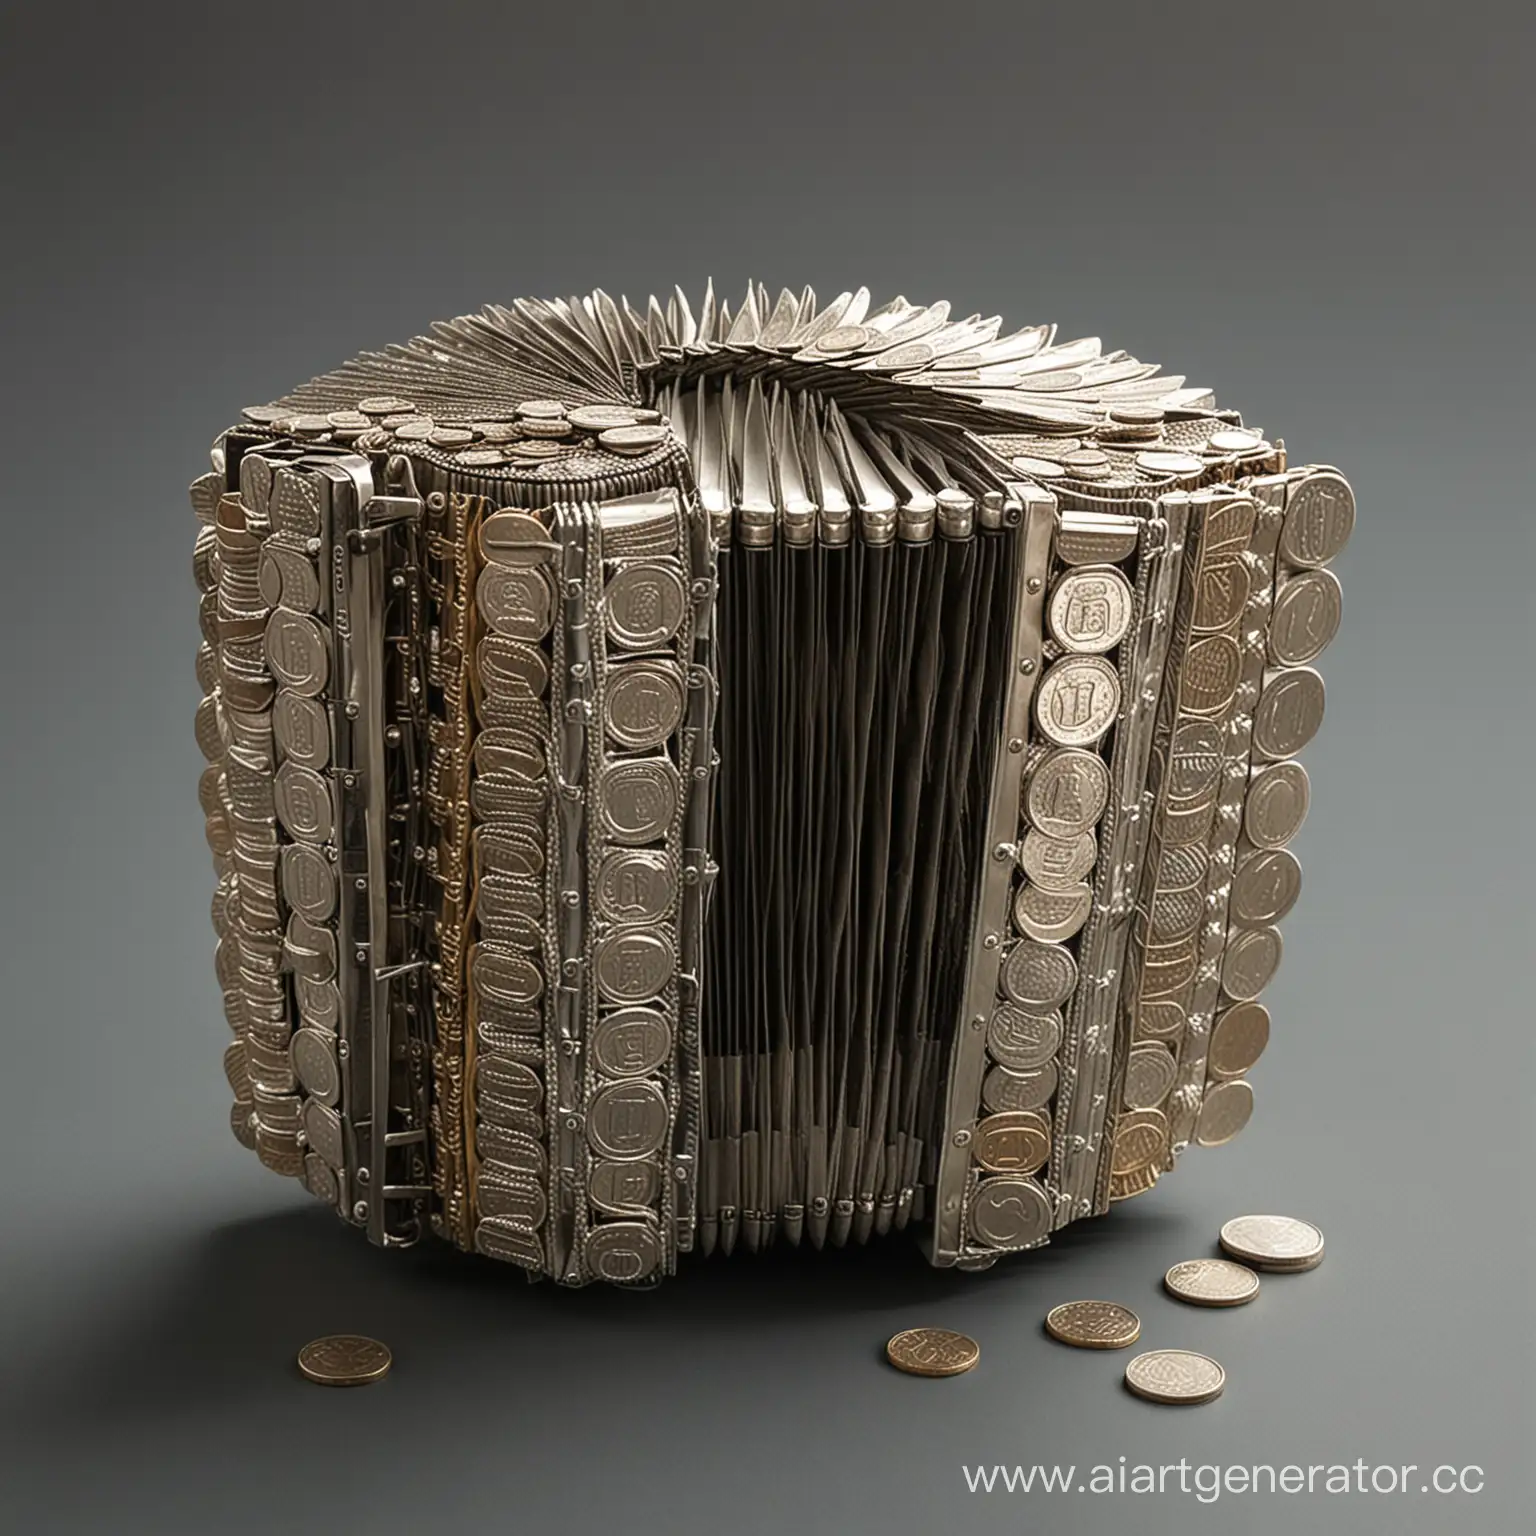 Creative-Accordion-Craft-Musical-Instrument-Made-of-Coins